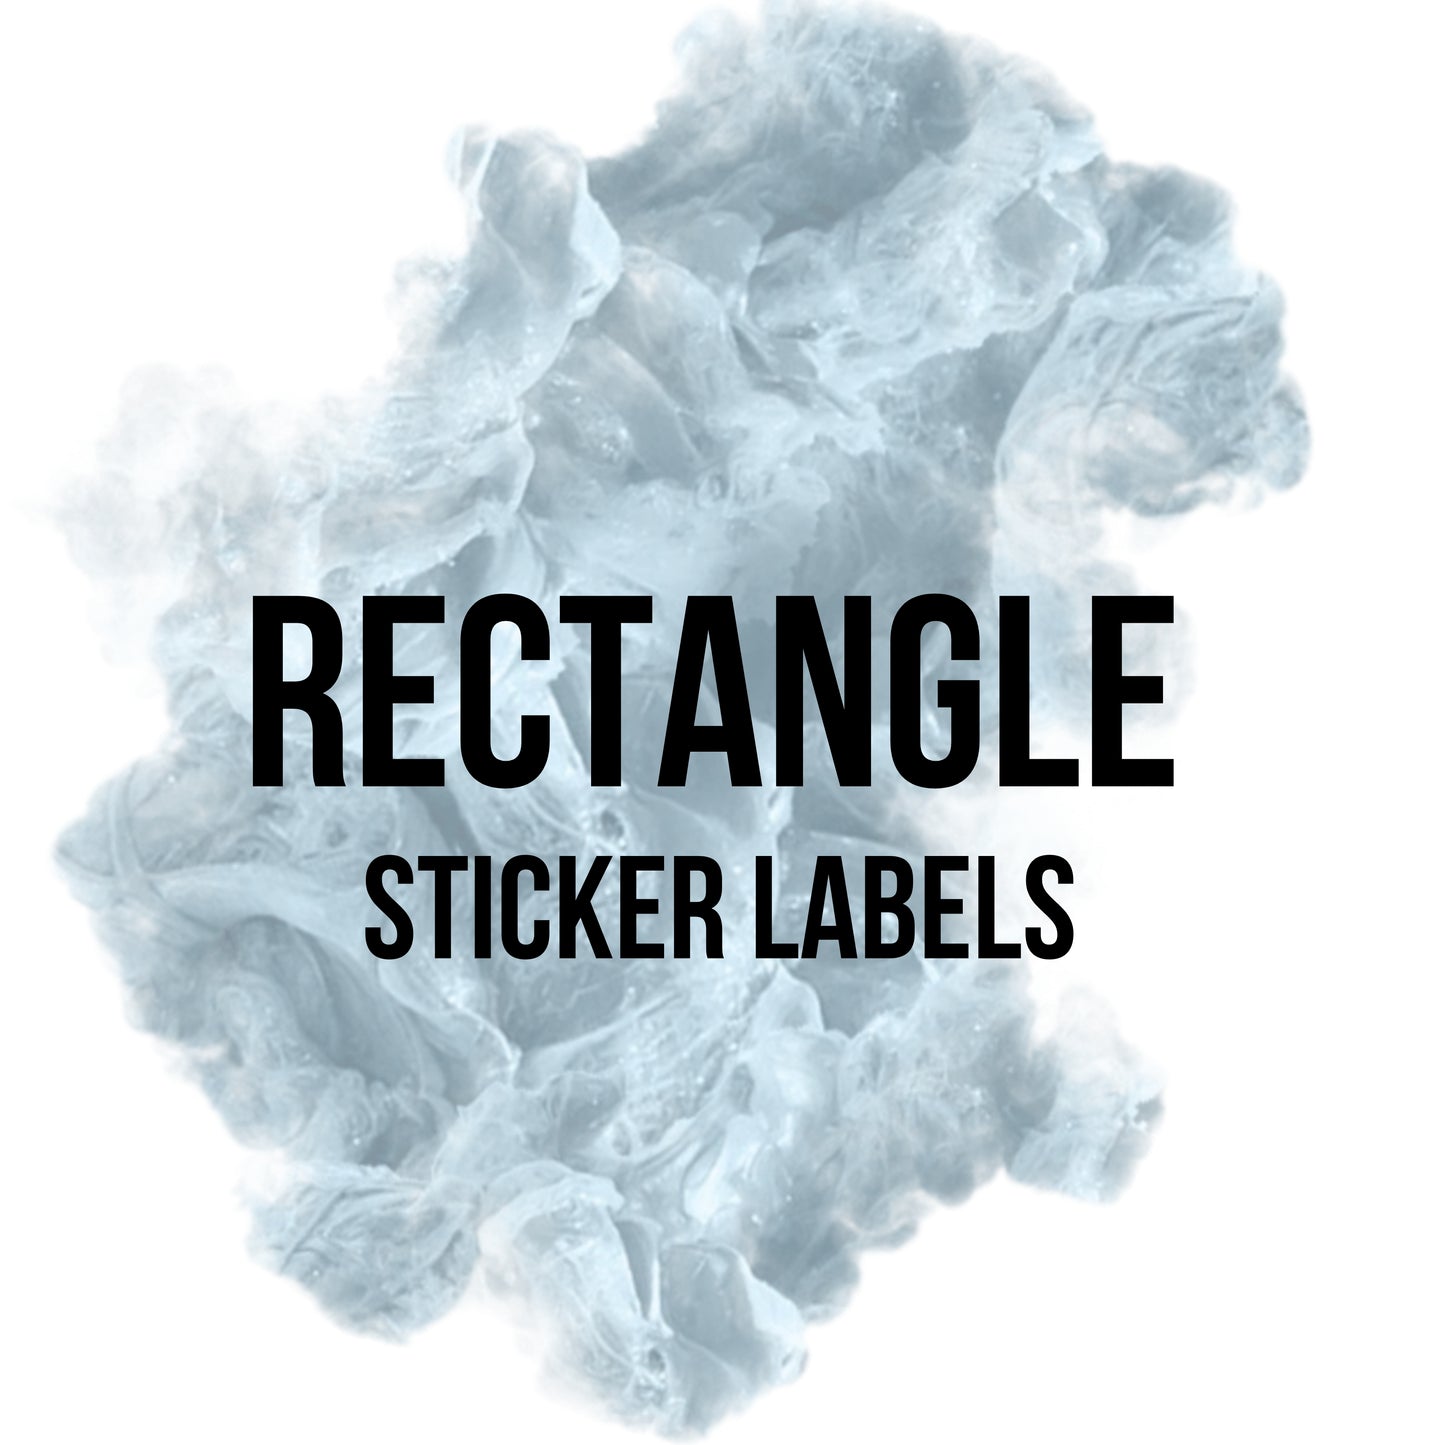 RECTANGLE STICKER LABELS